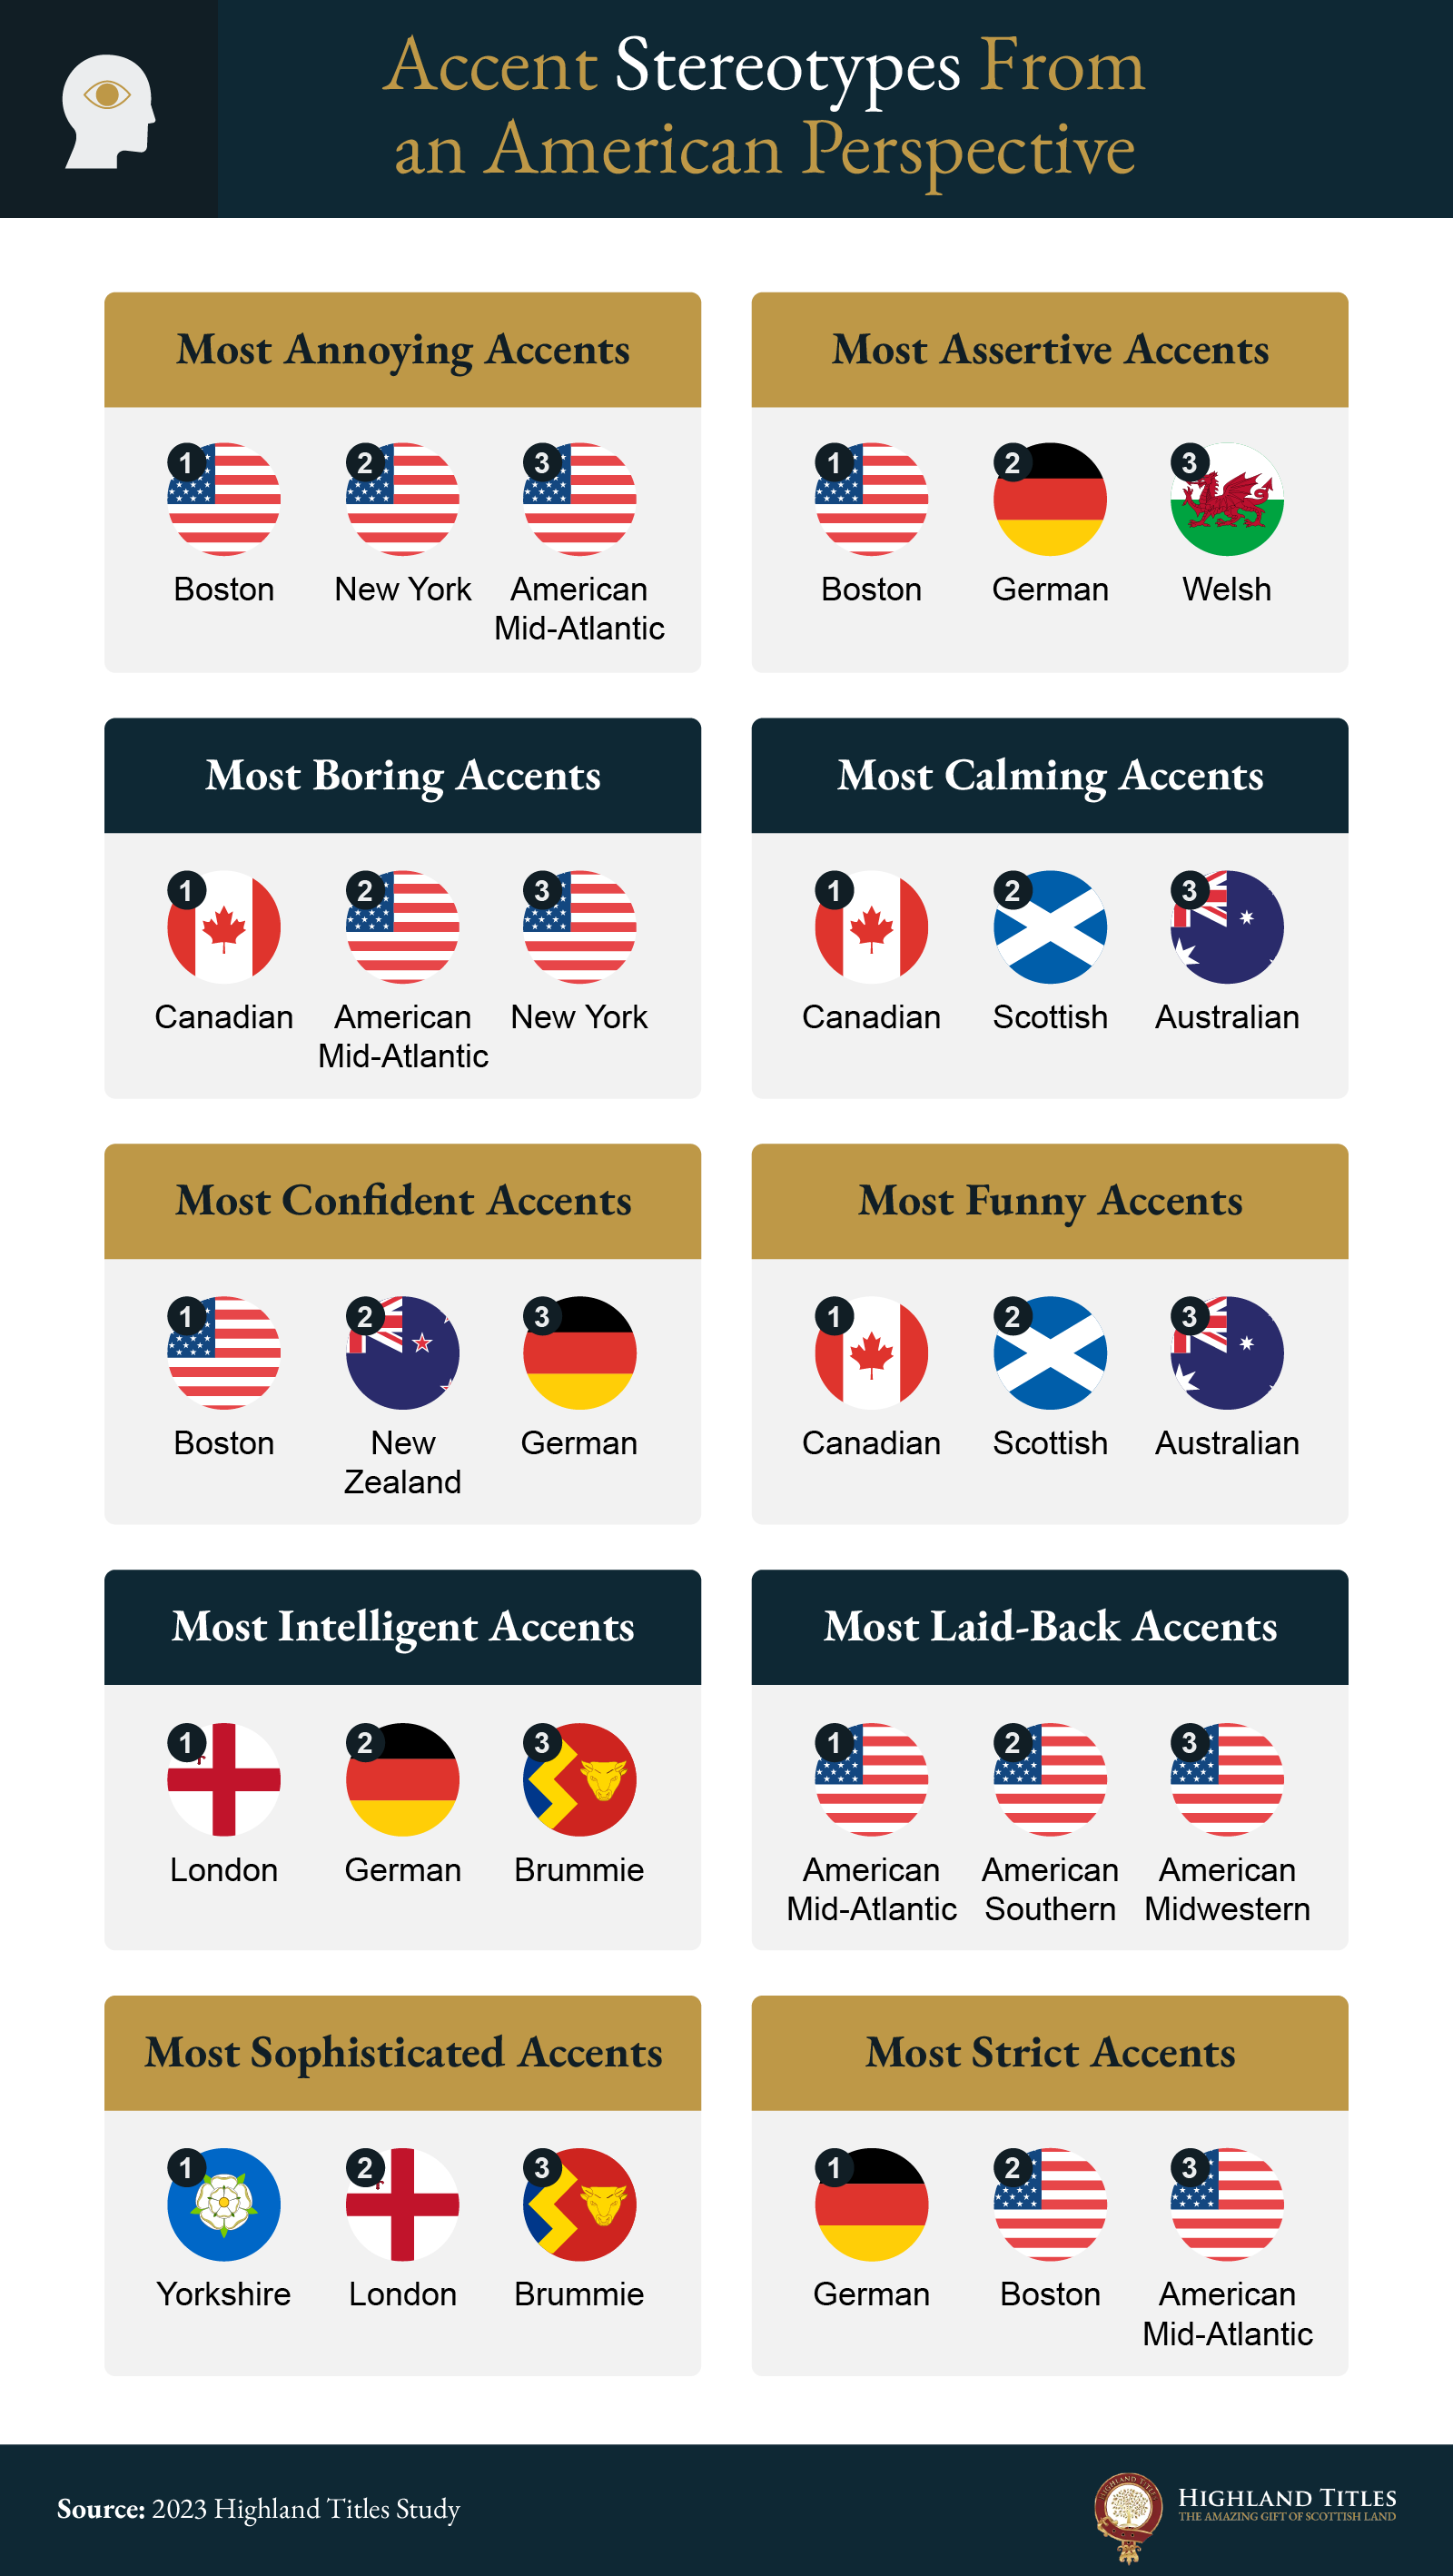 Accent stereotypes from an American perspective